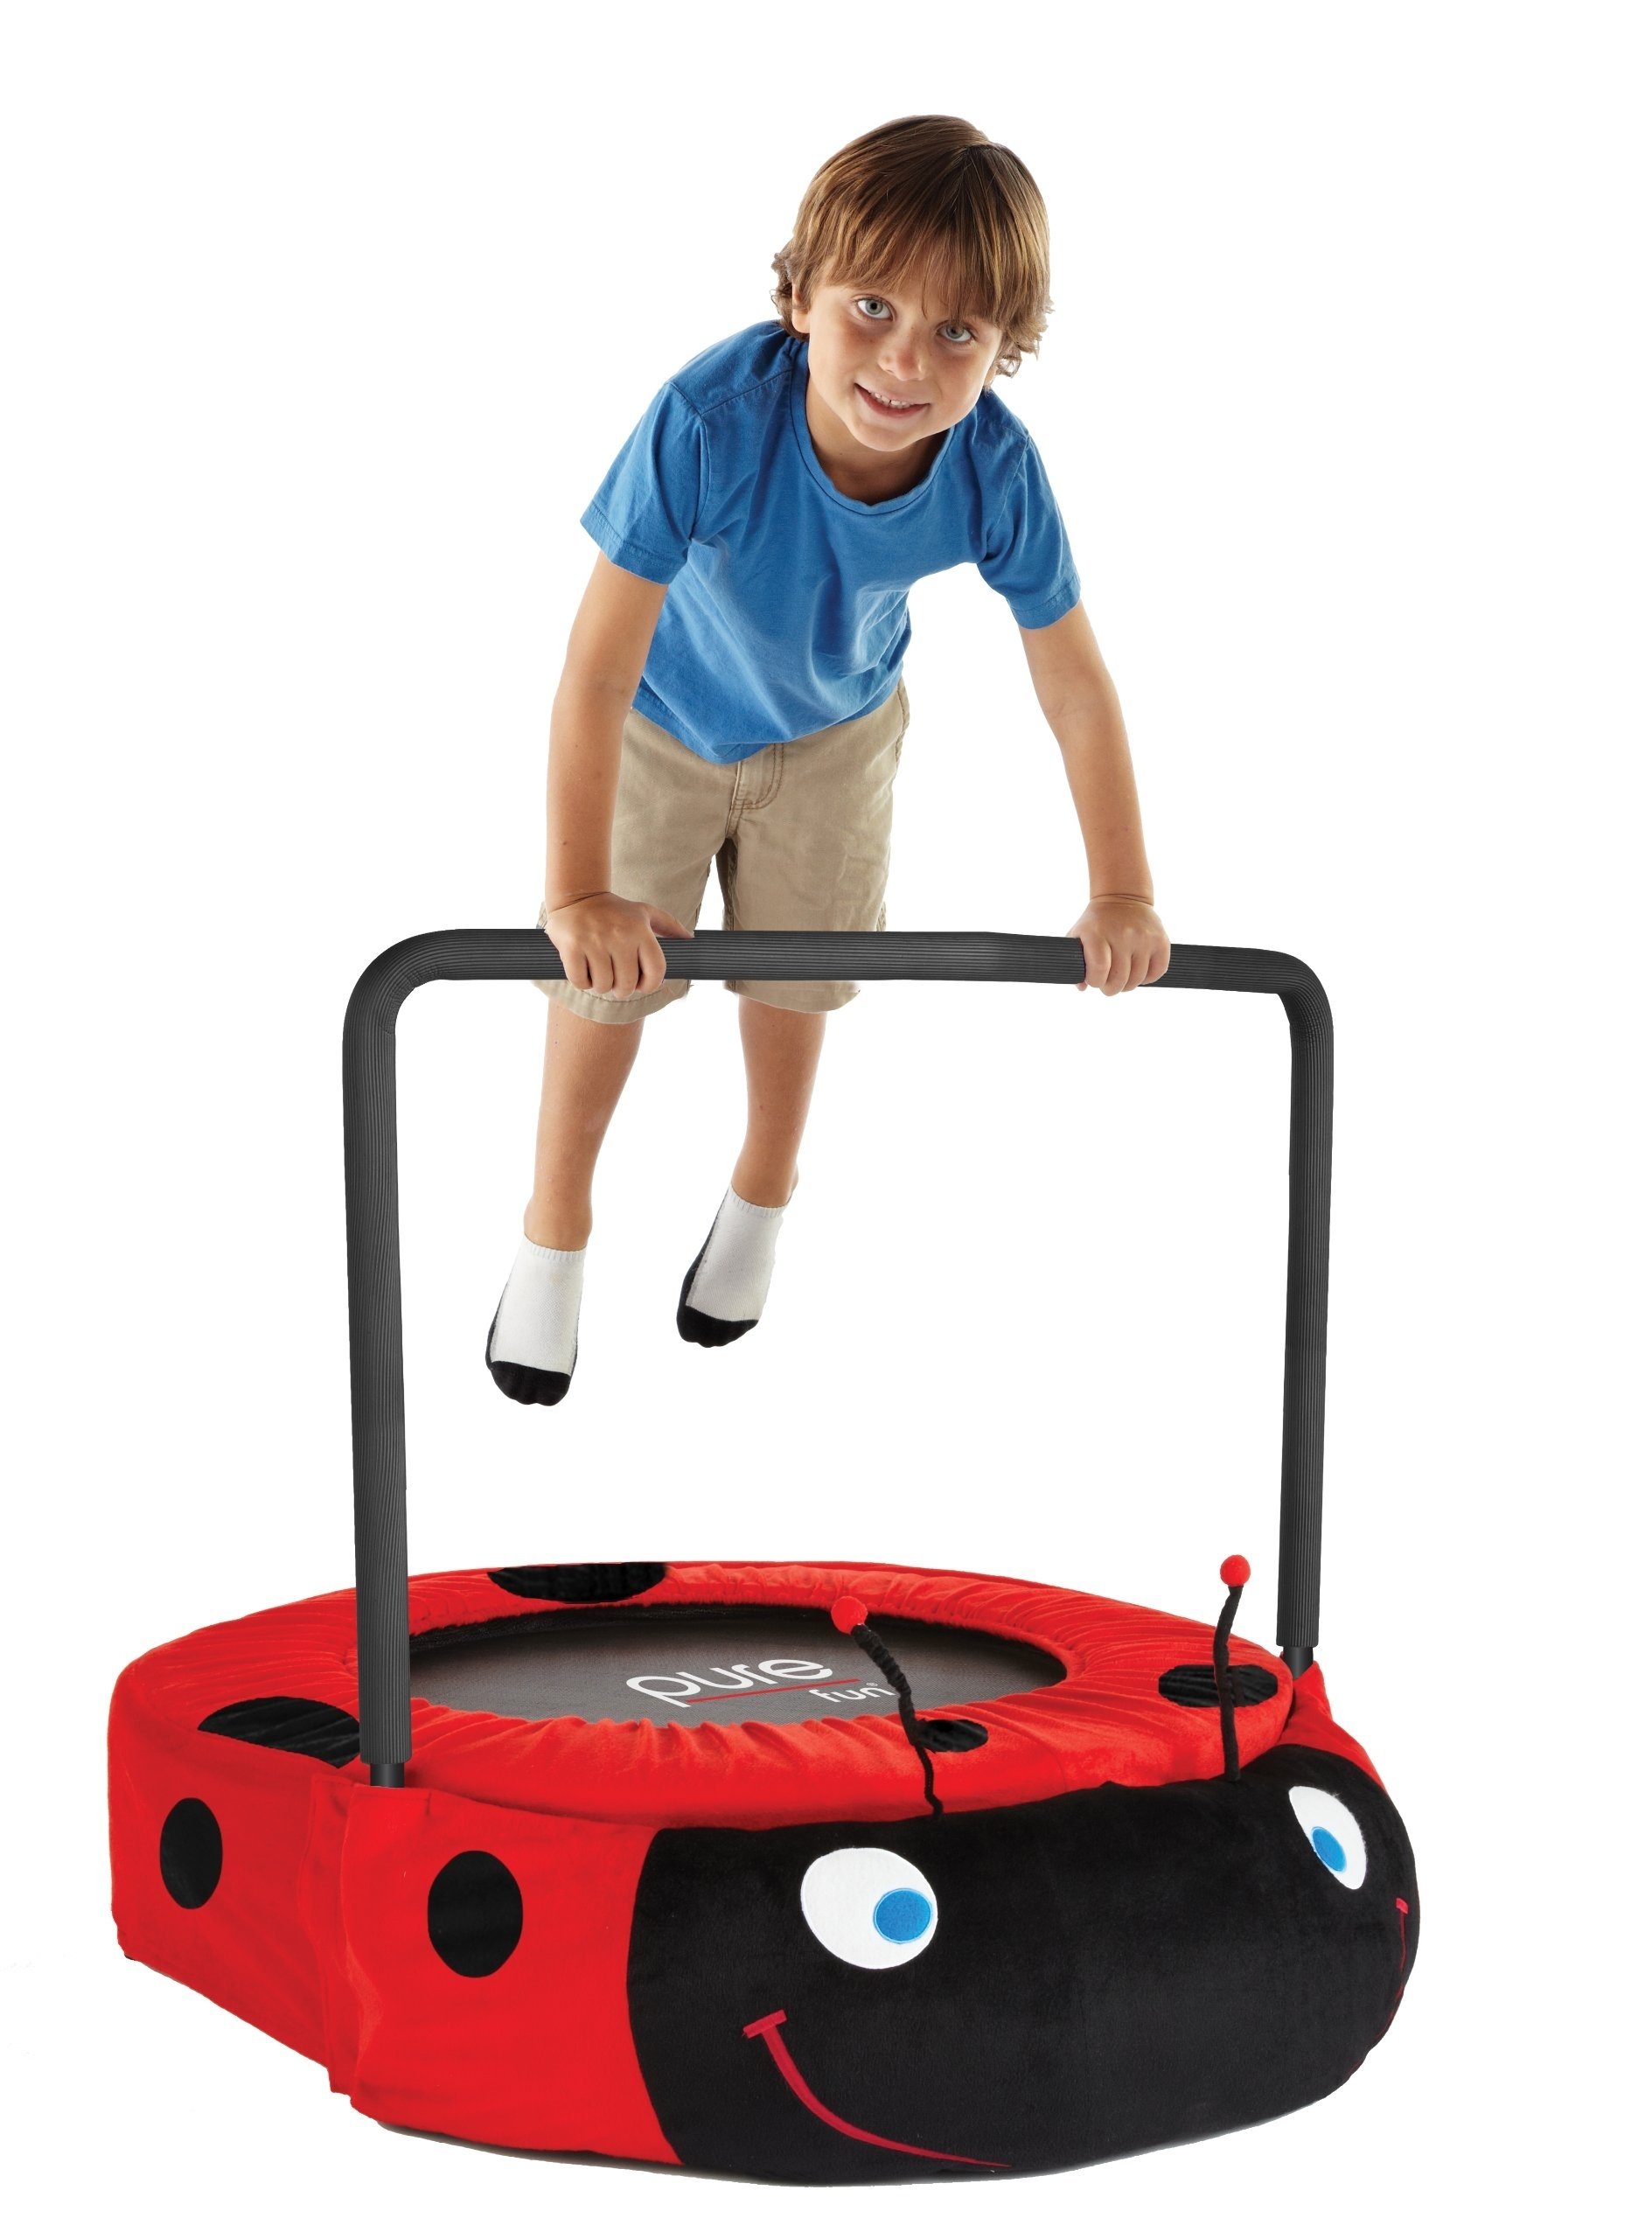 10 Unique Gift Ideas 5 Year Old Boy best gifts and toys for 5 year old boys gift trampolines and toy 1 2022